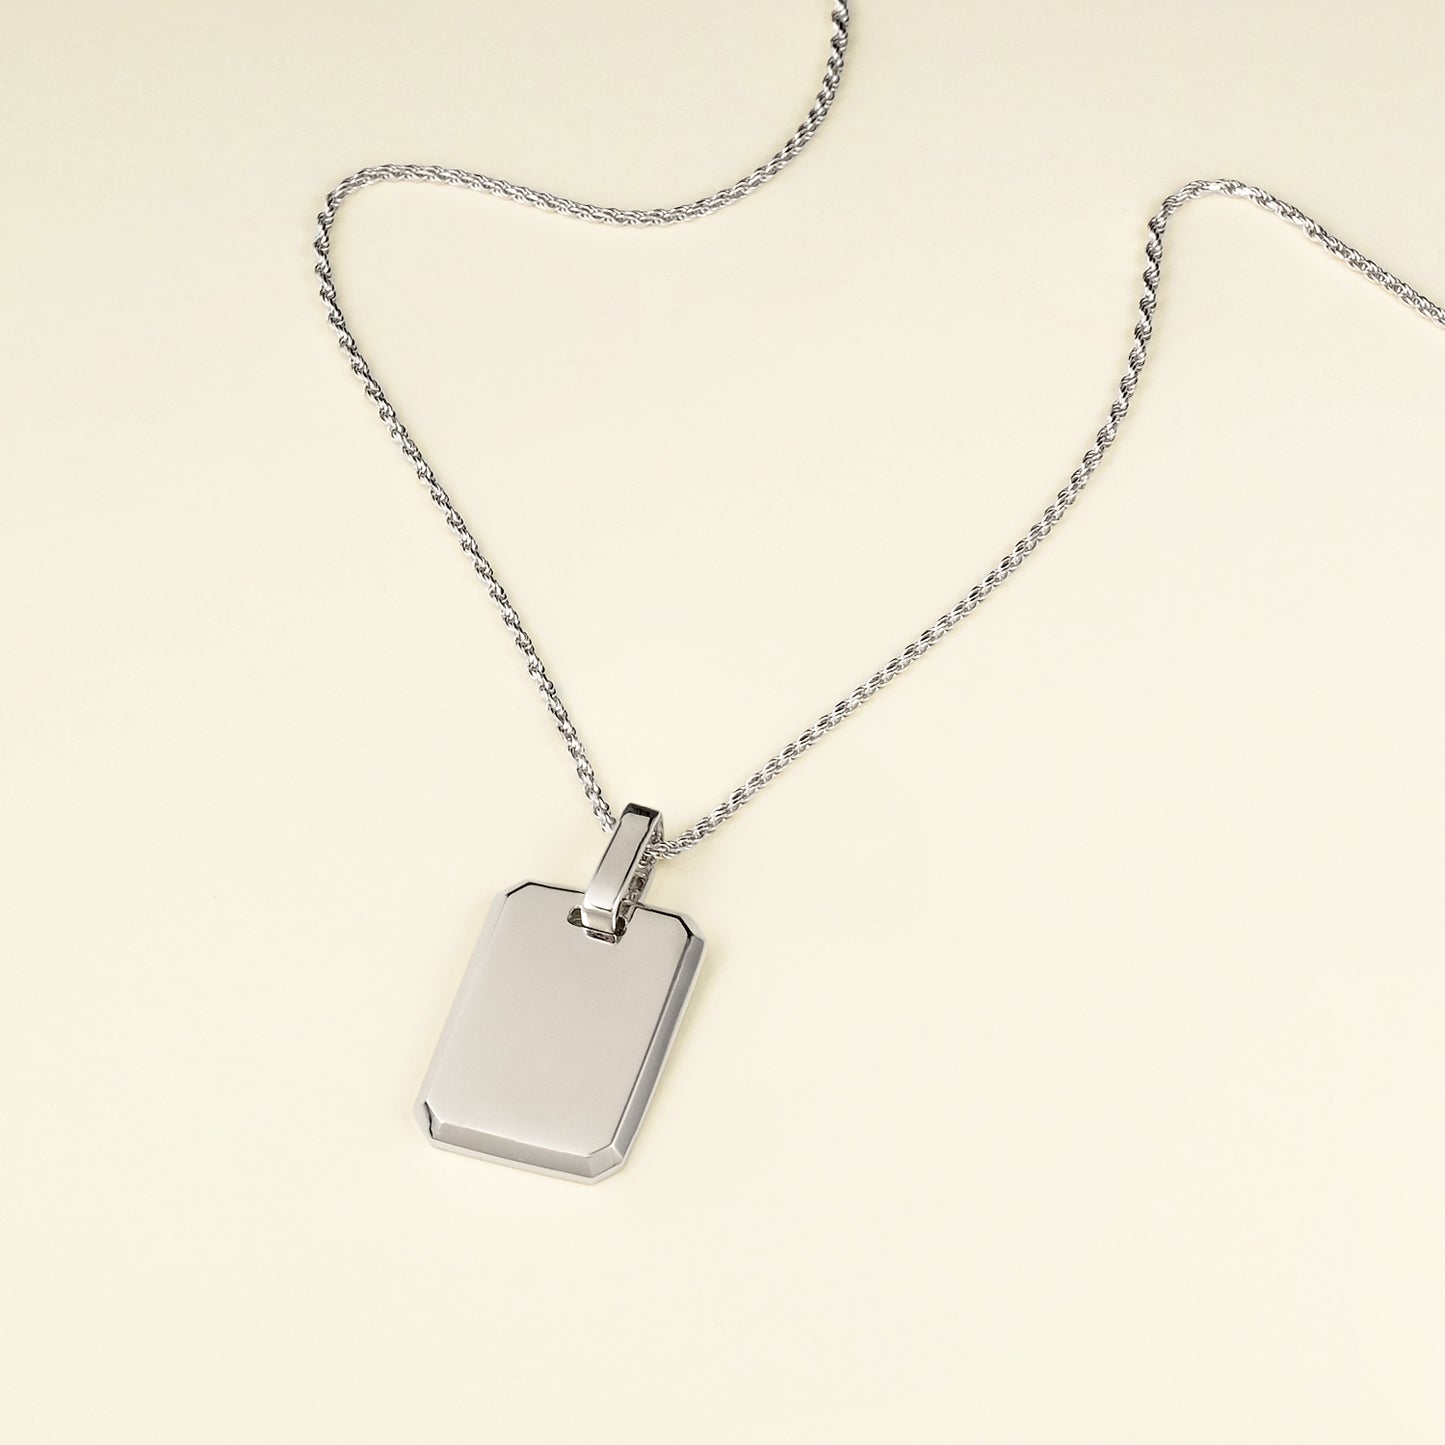 The Square Dog Tag